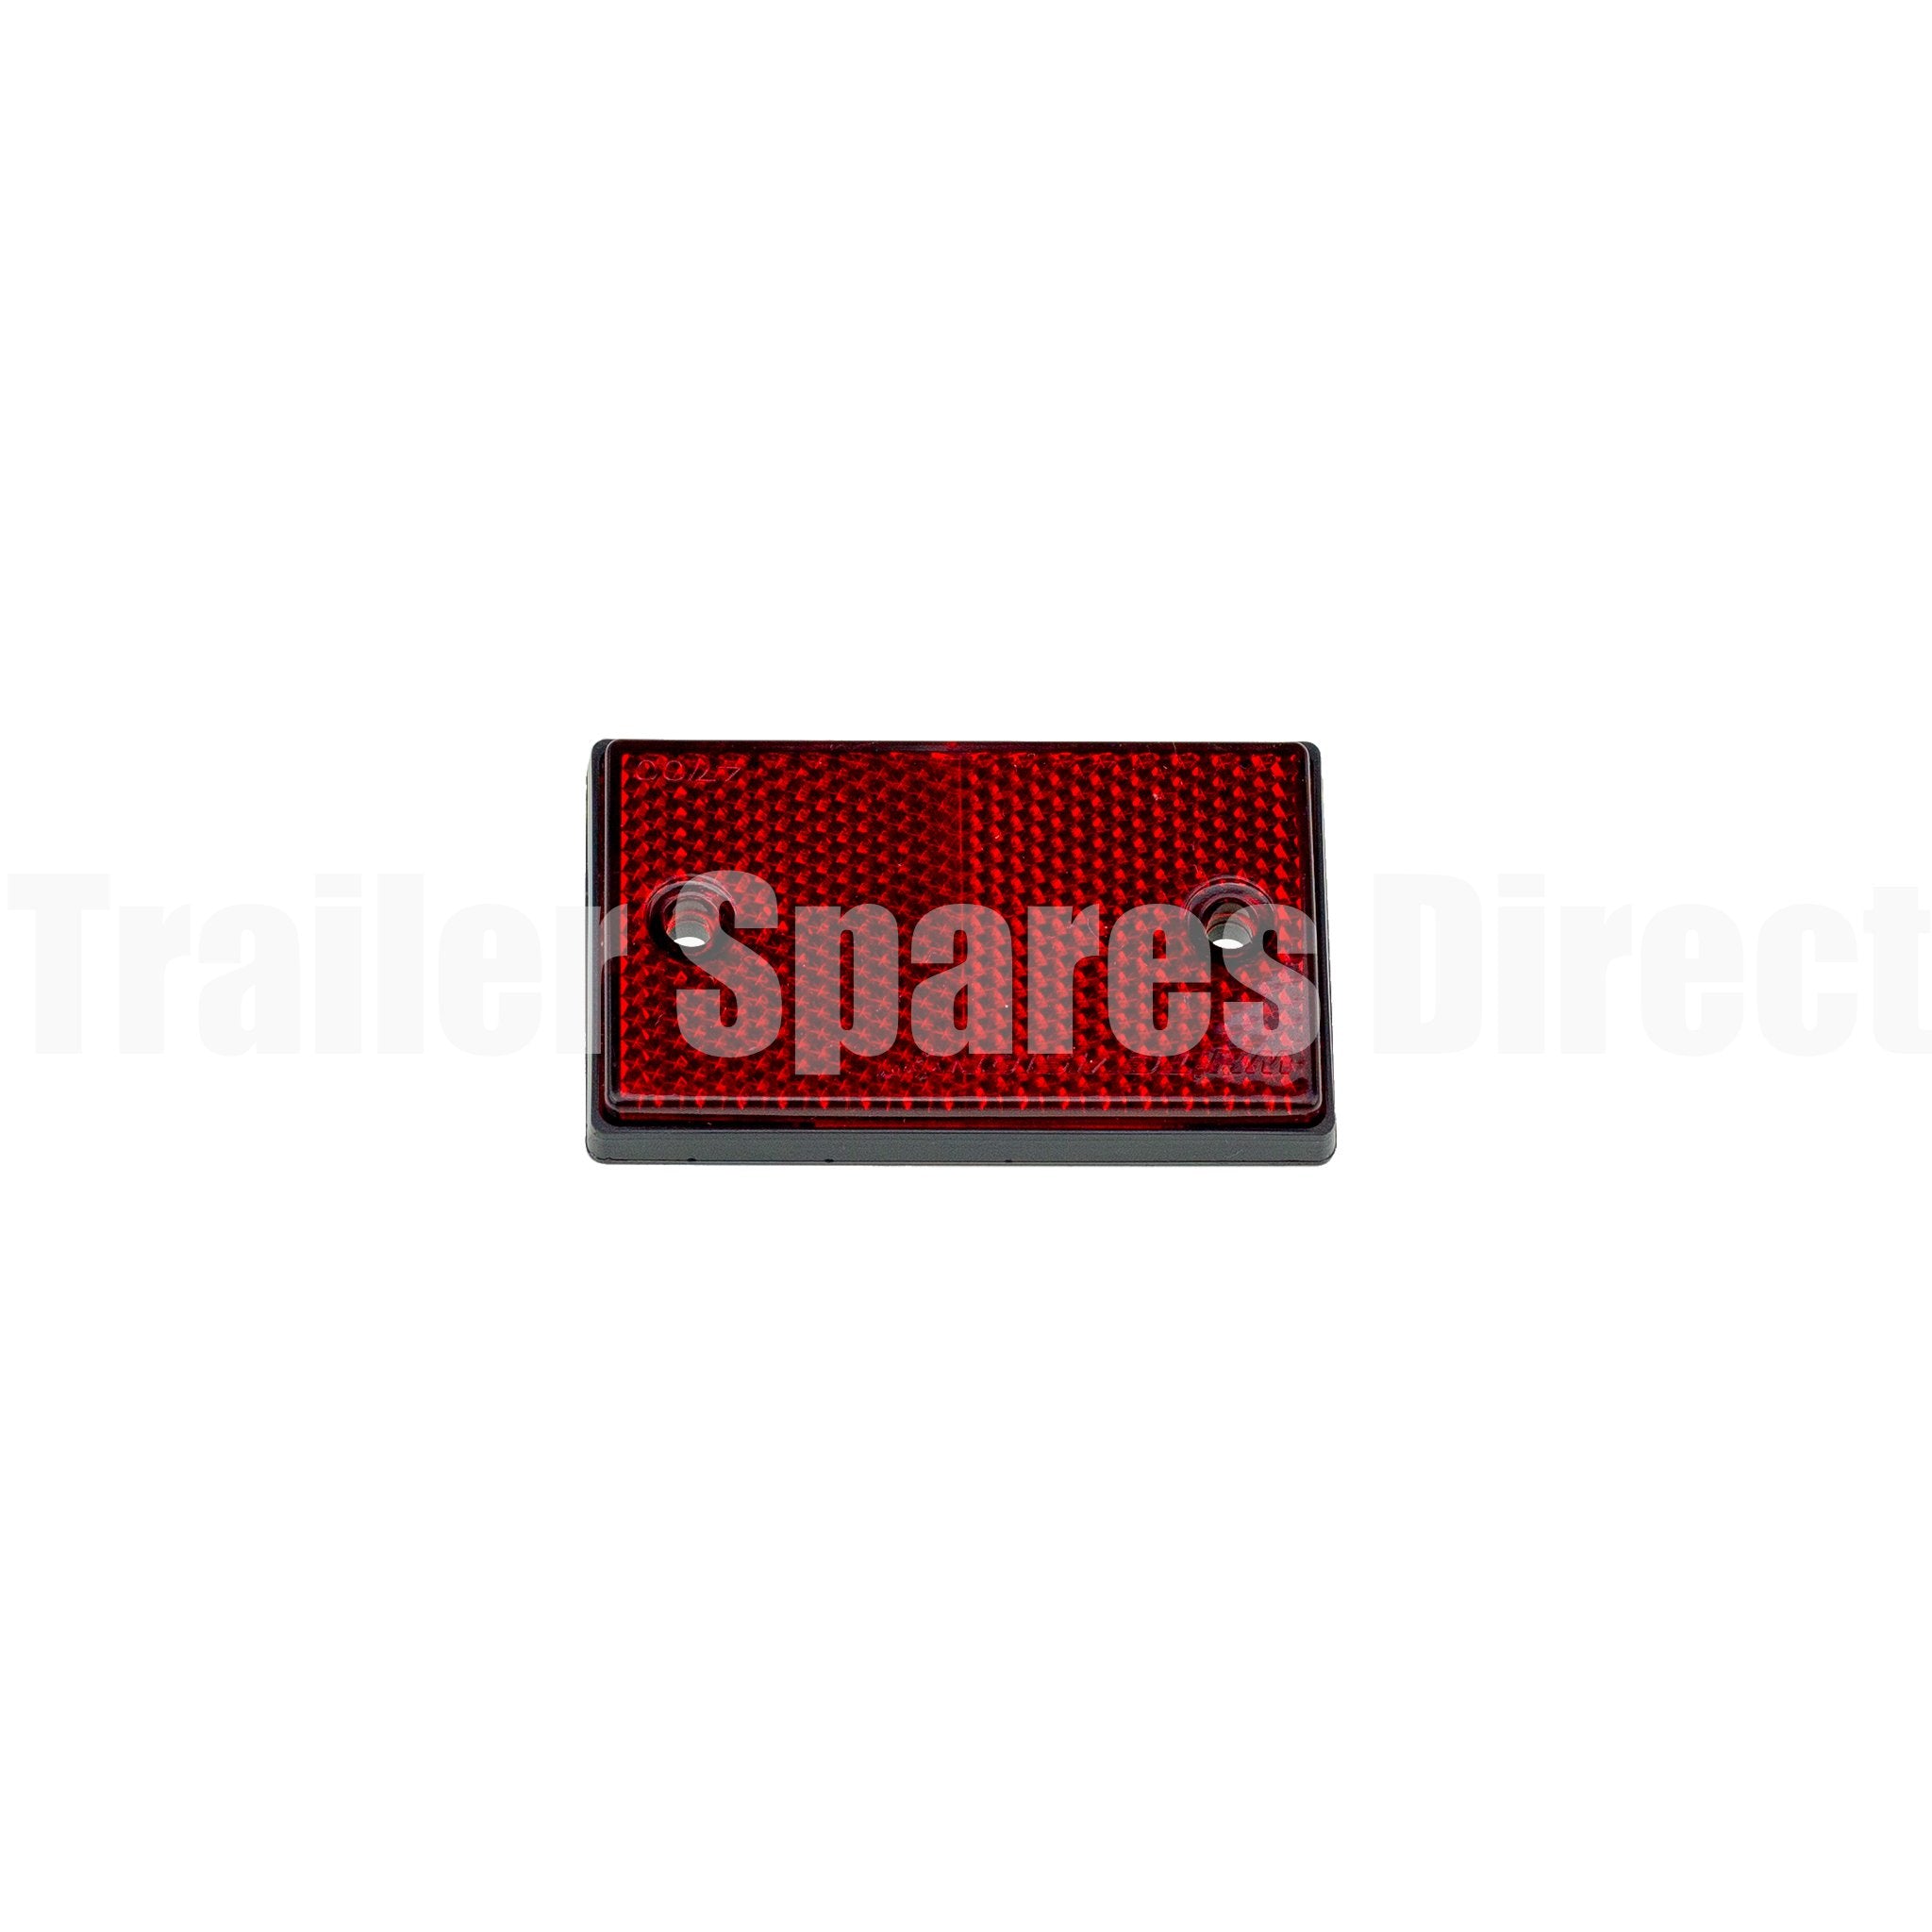 Reflector red rectangle 75 x 45mm screw or adhesive